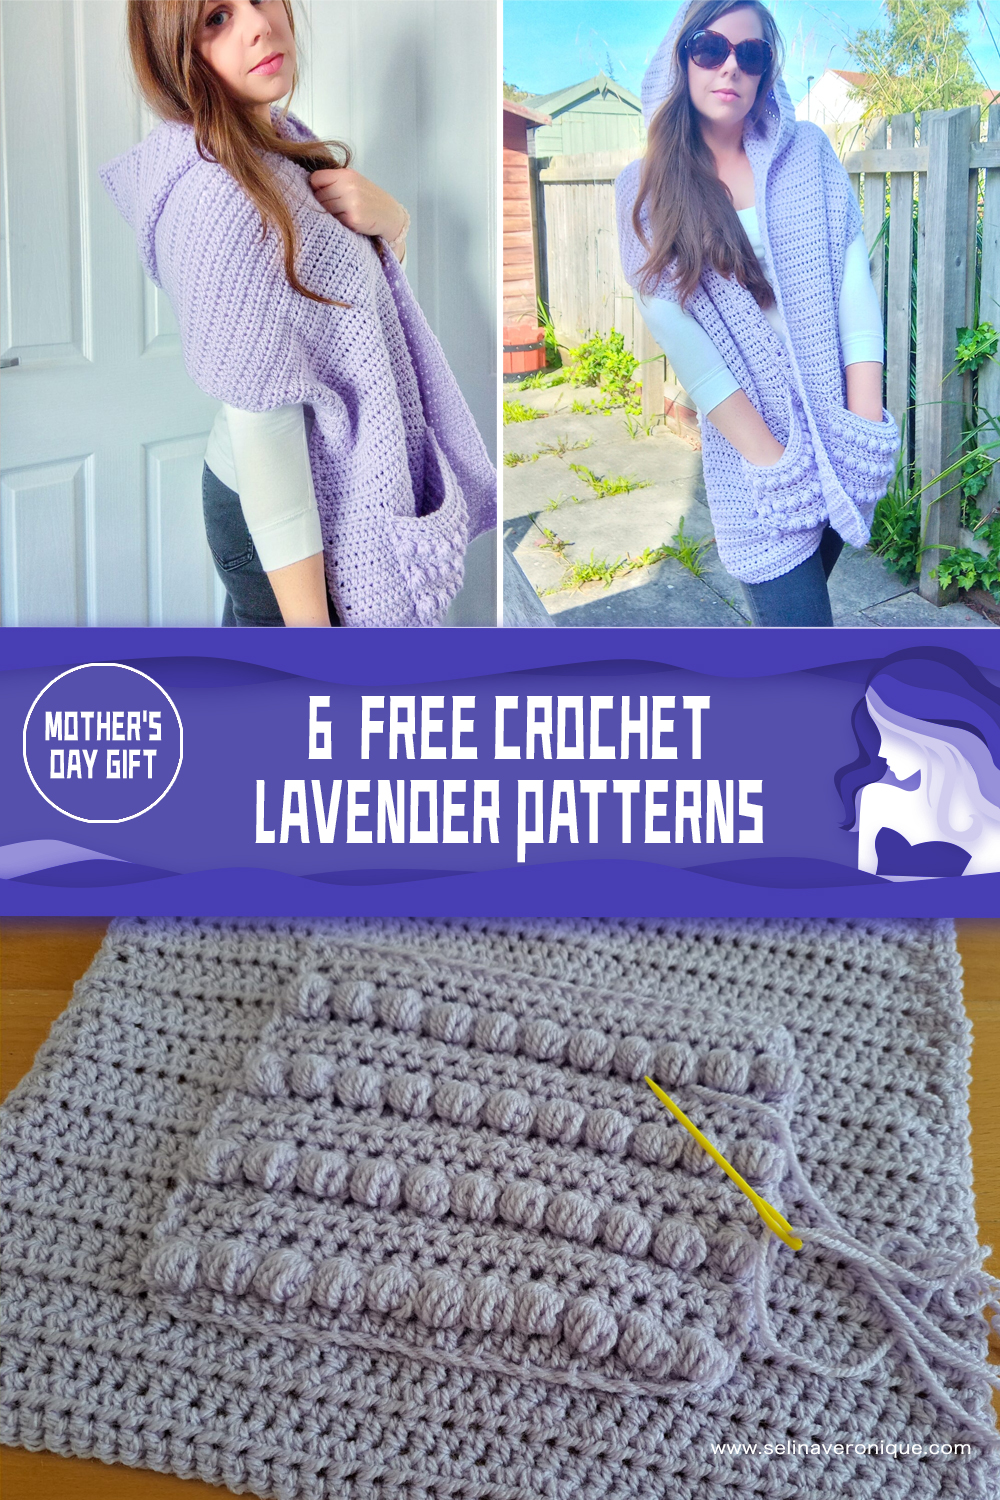 Mother's Day Gift - 6 FREE Crochet Lavender Patterns